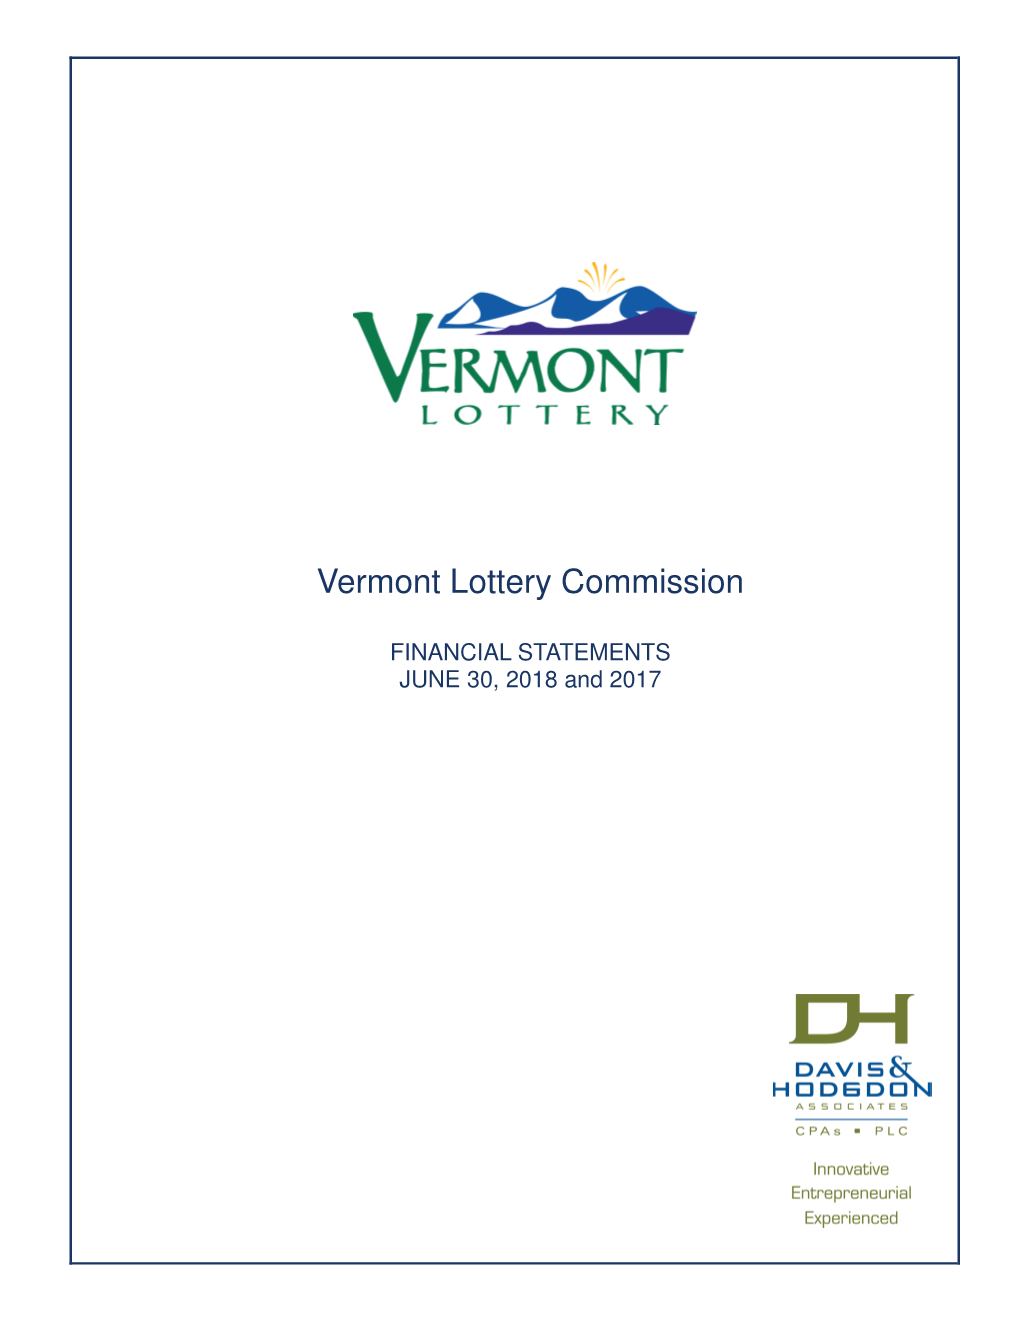 Vermont Lottery Commission